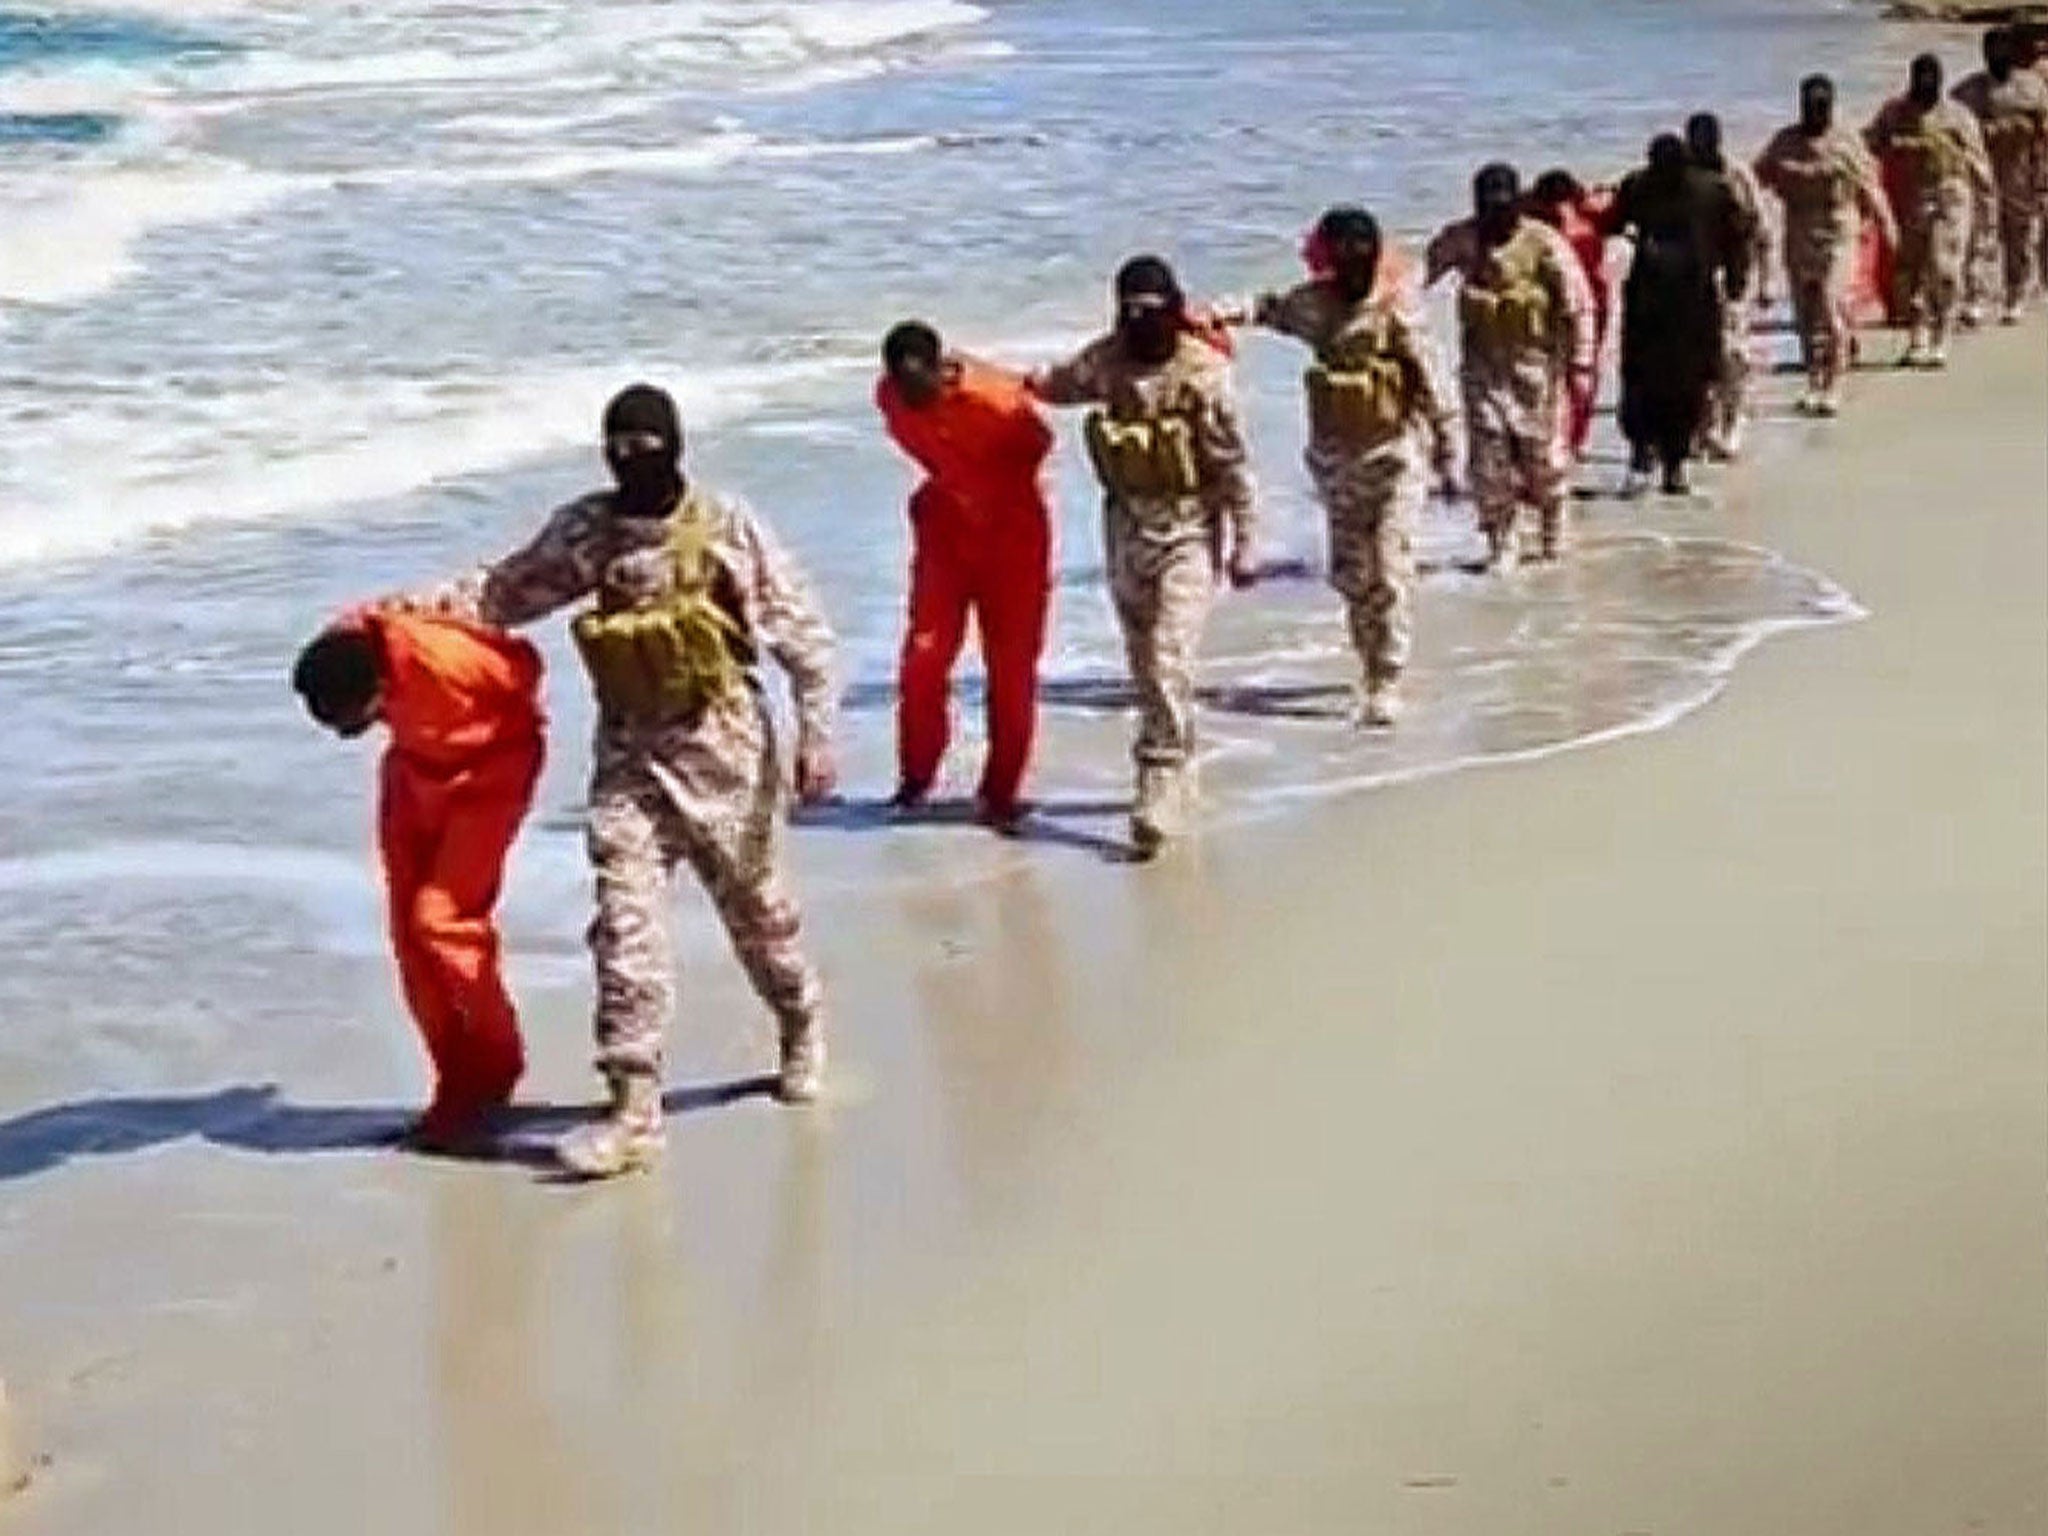 Isis’ media arm released a 29-minute video purporting to show militants executing captives in Libya on Sunday